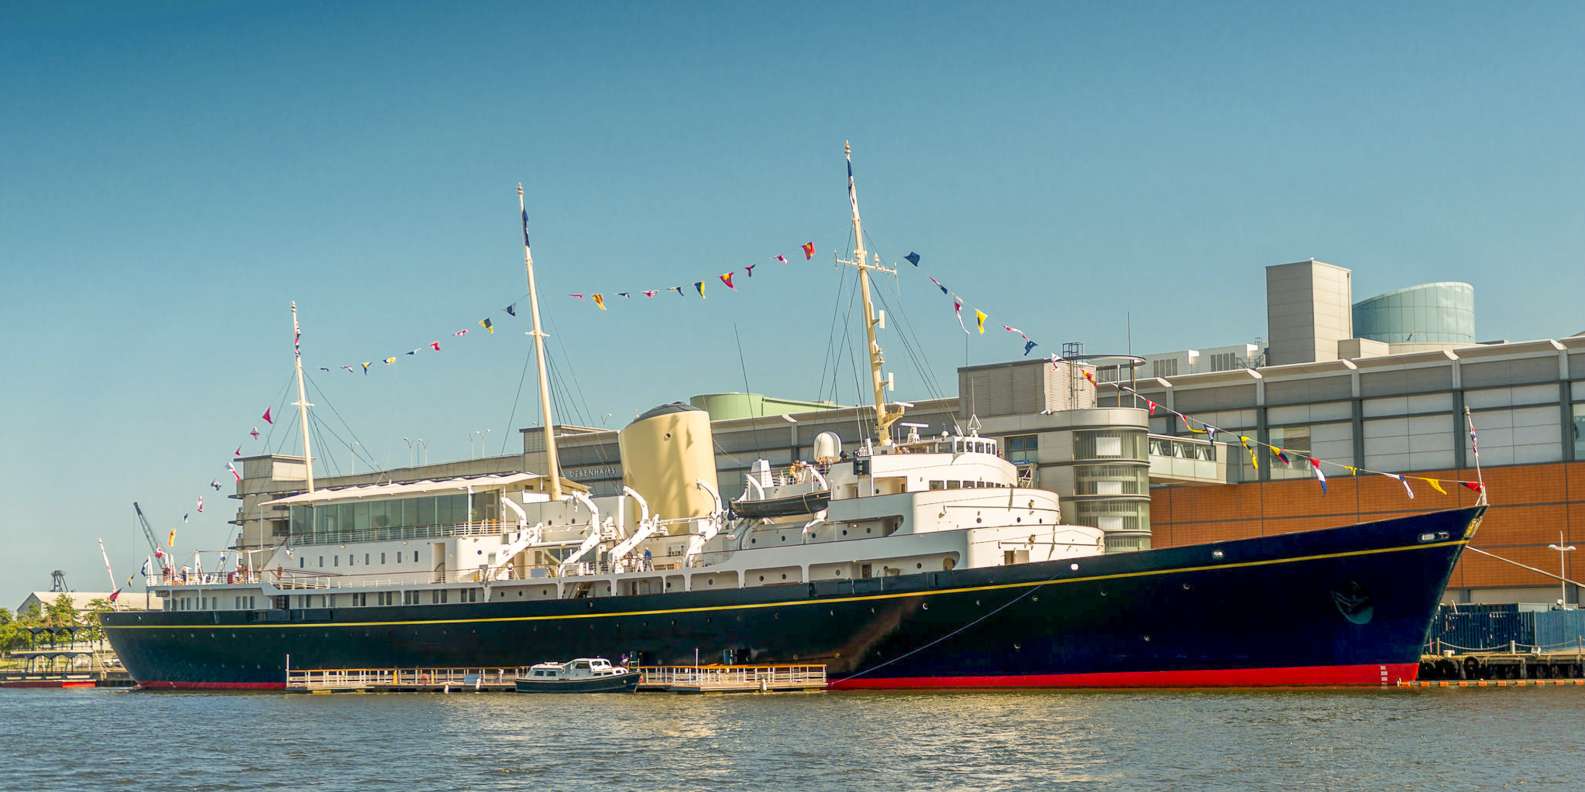 royal yacht britannia tickets 2 for 1 price discount